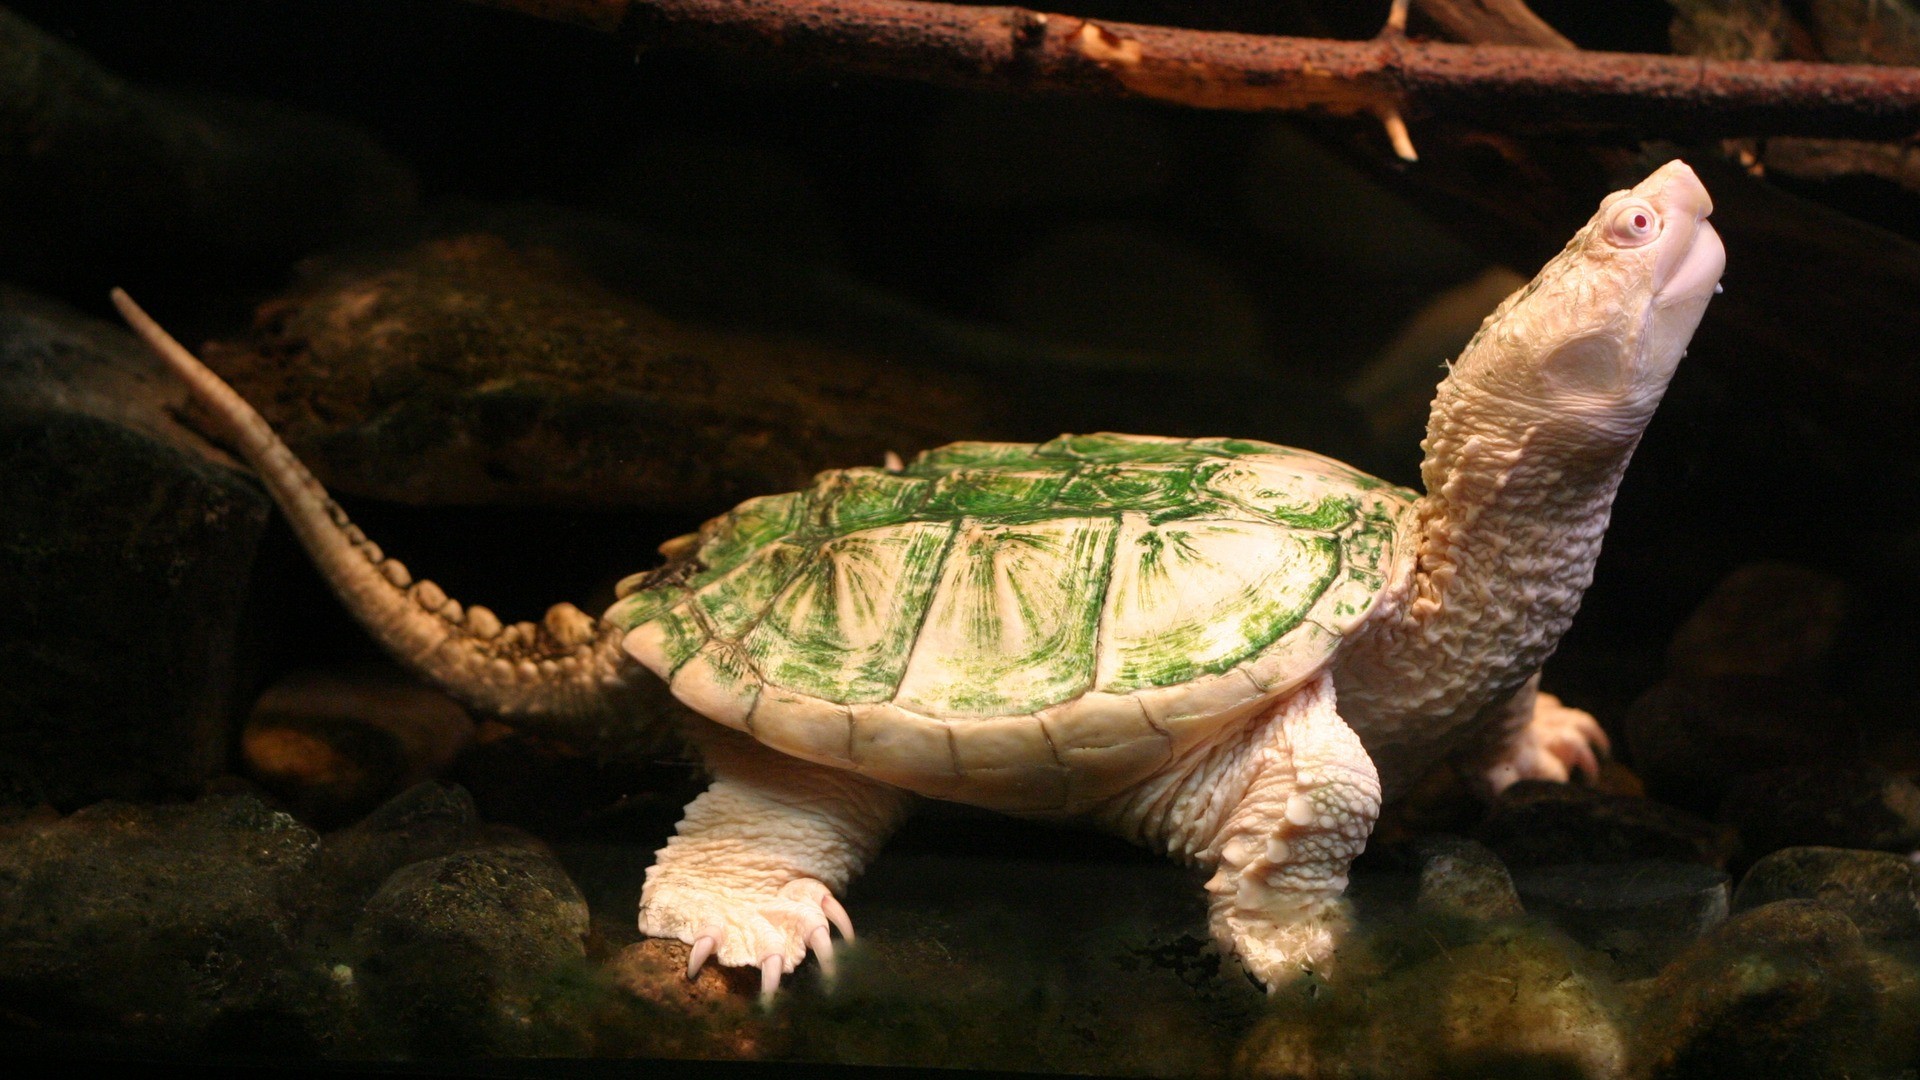 wallpaper reptile turtle interesting images wallpapers 1920x1080 1920x1080